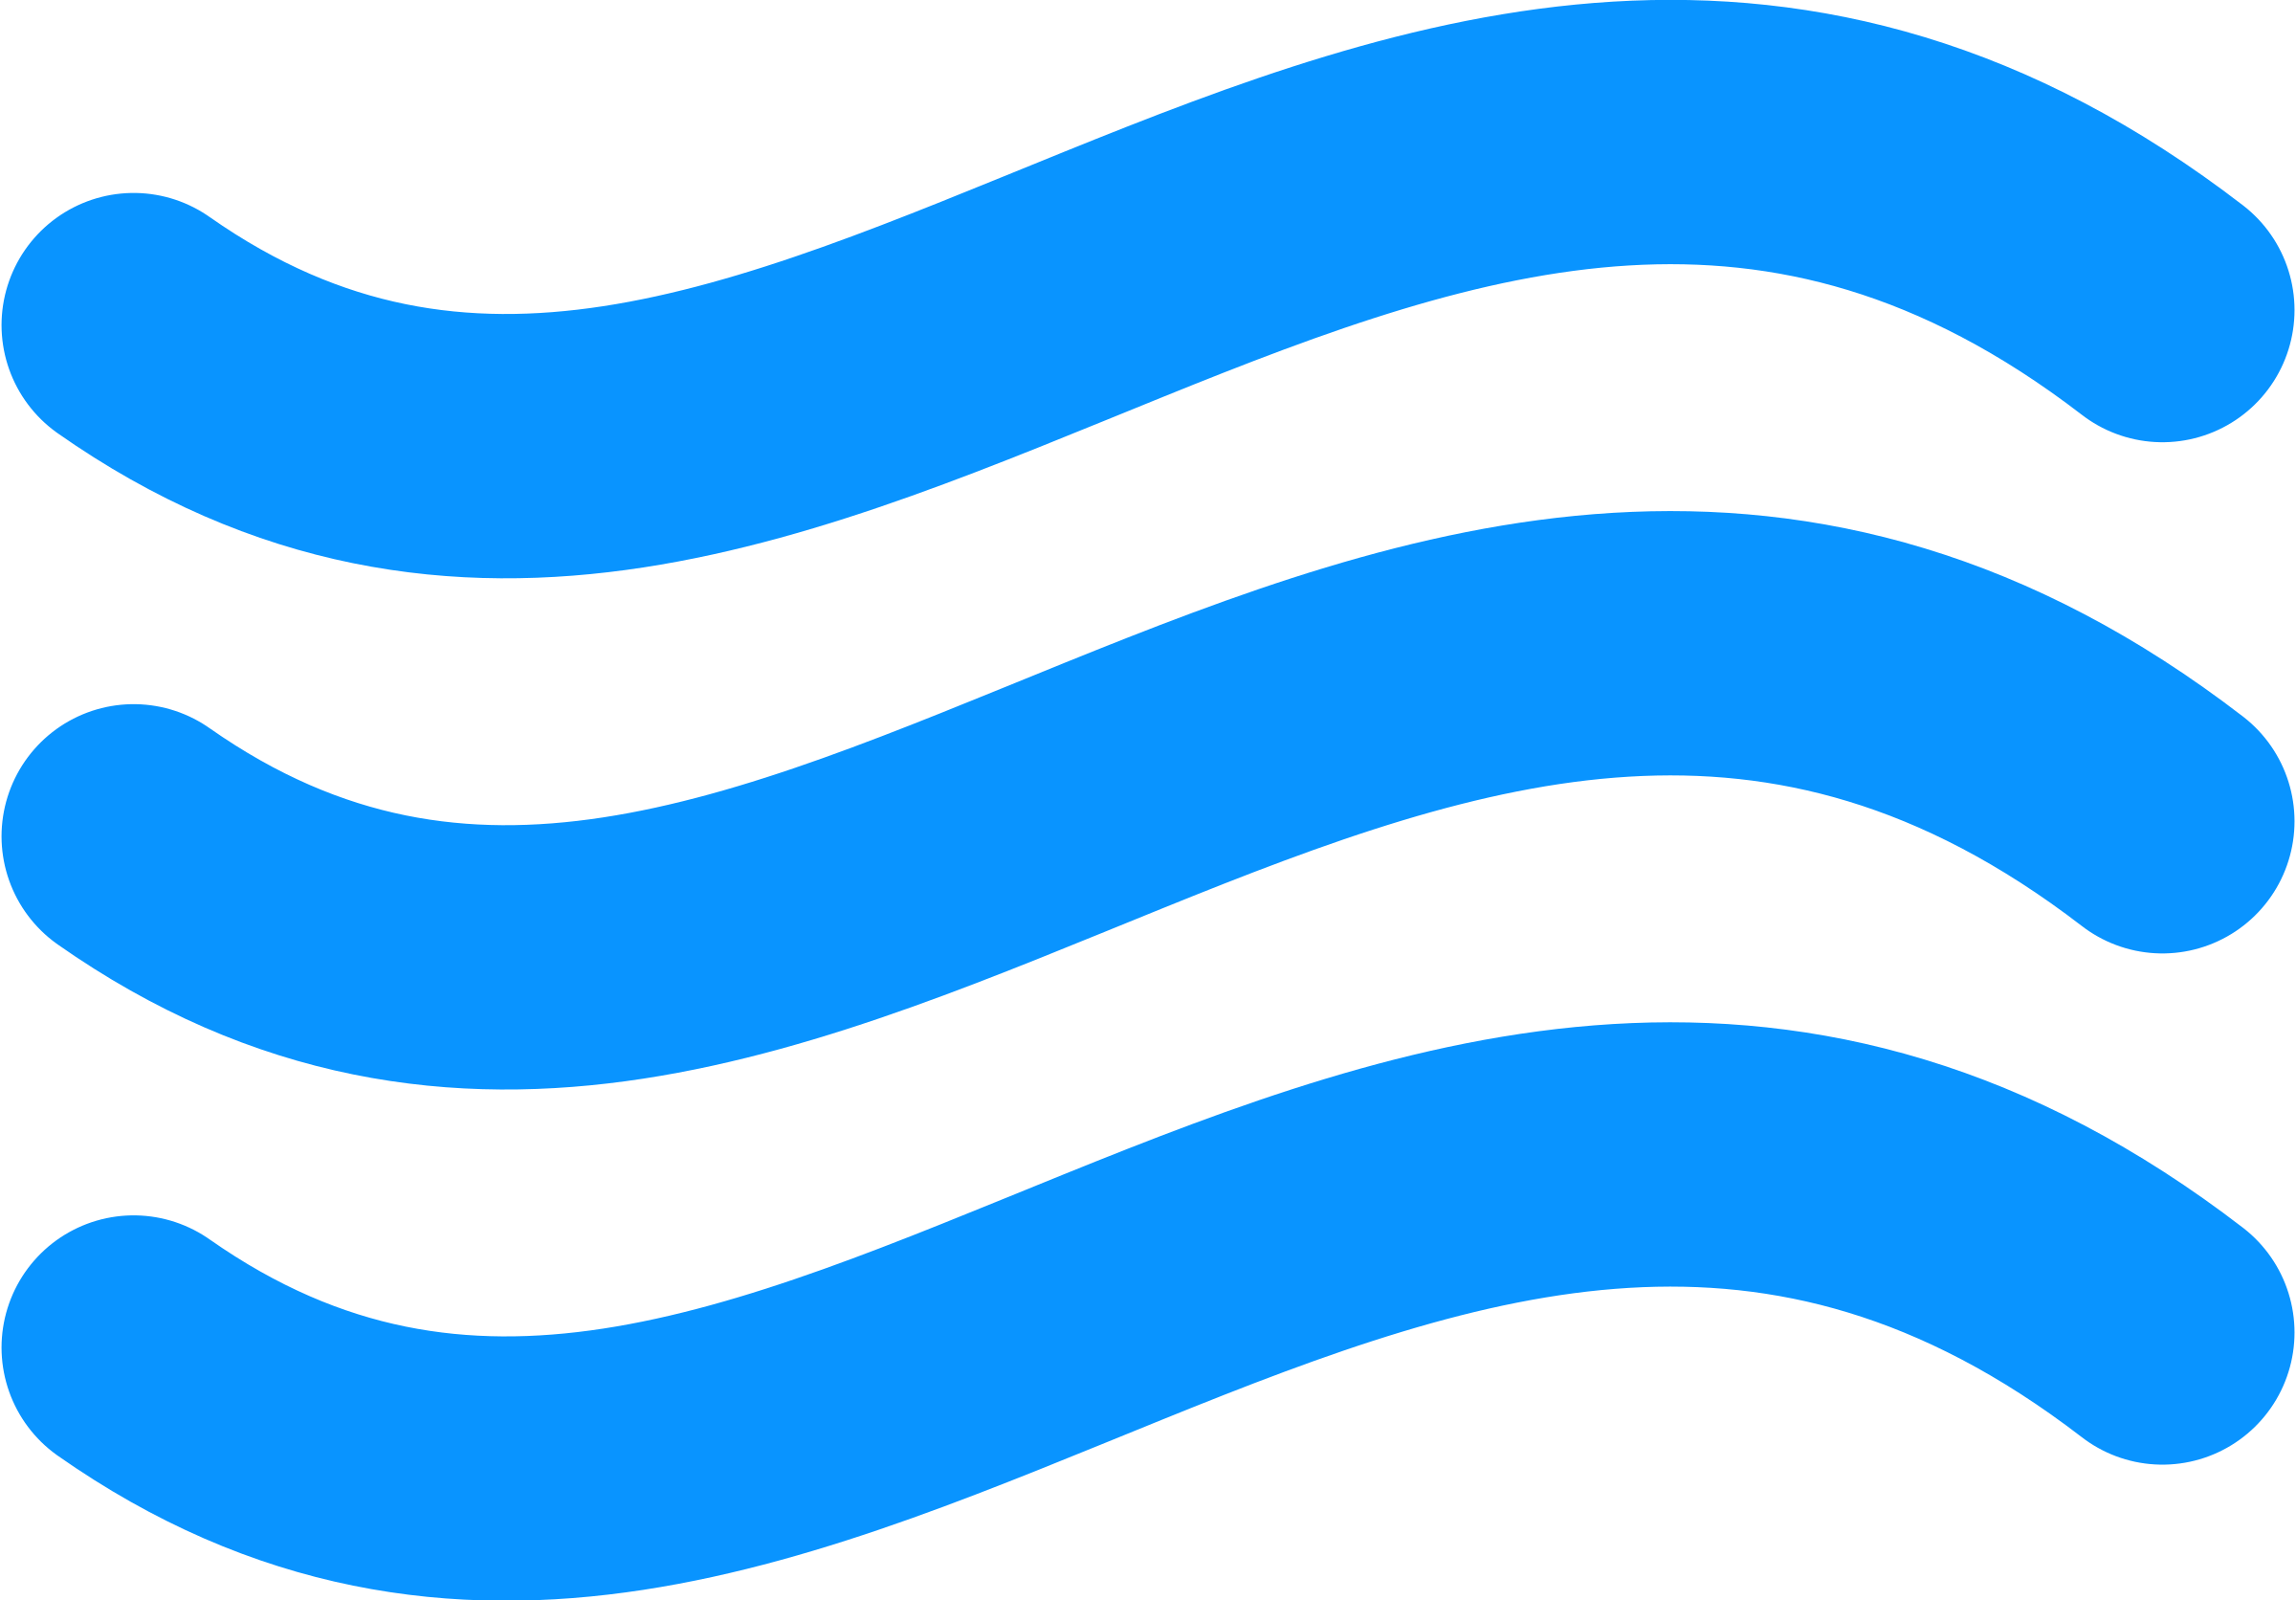 Simple water icon big. Waves clipart symbol